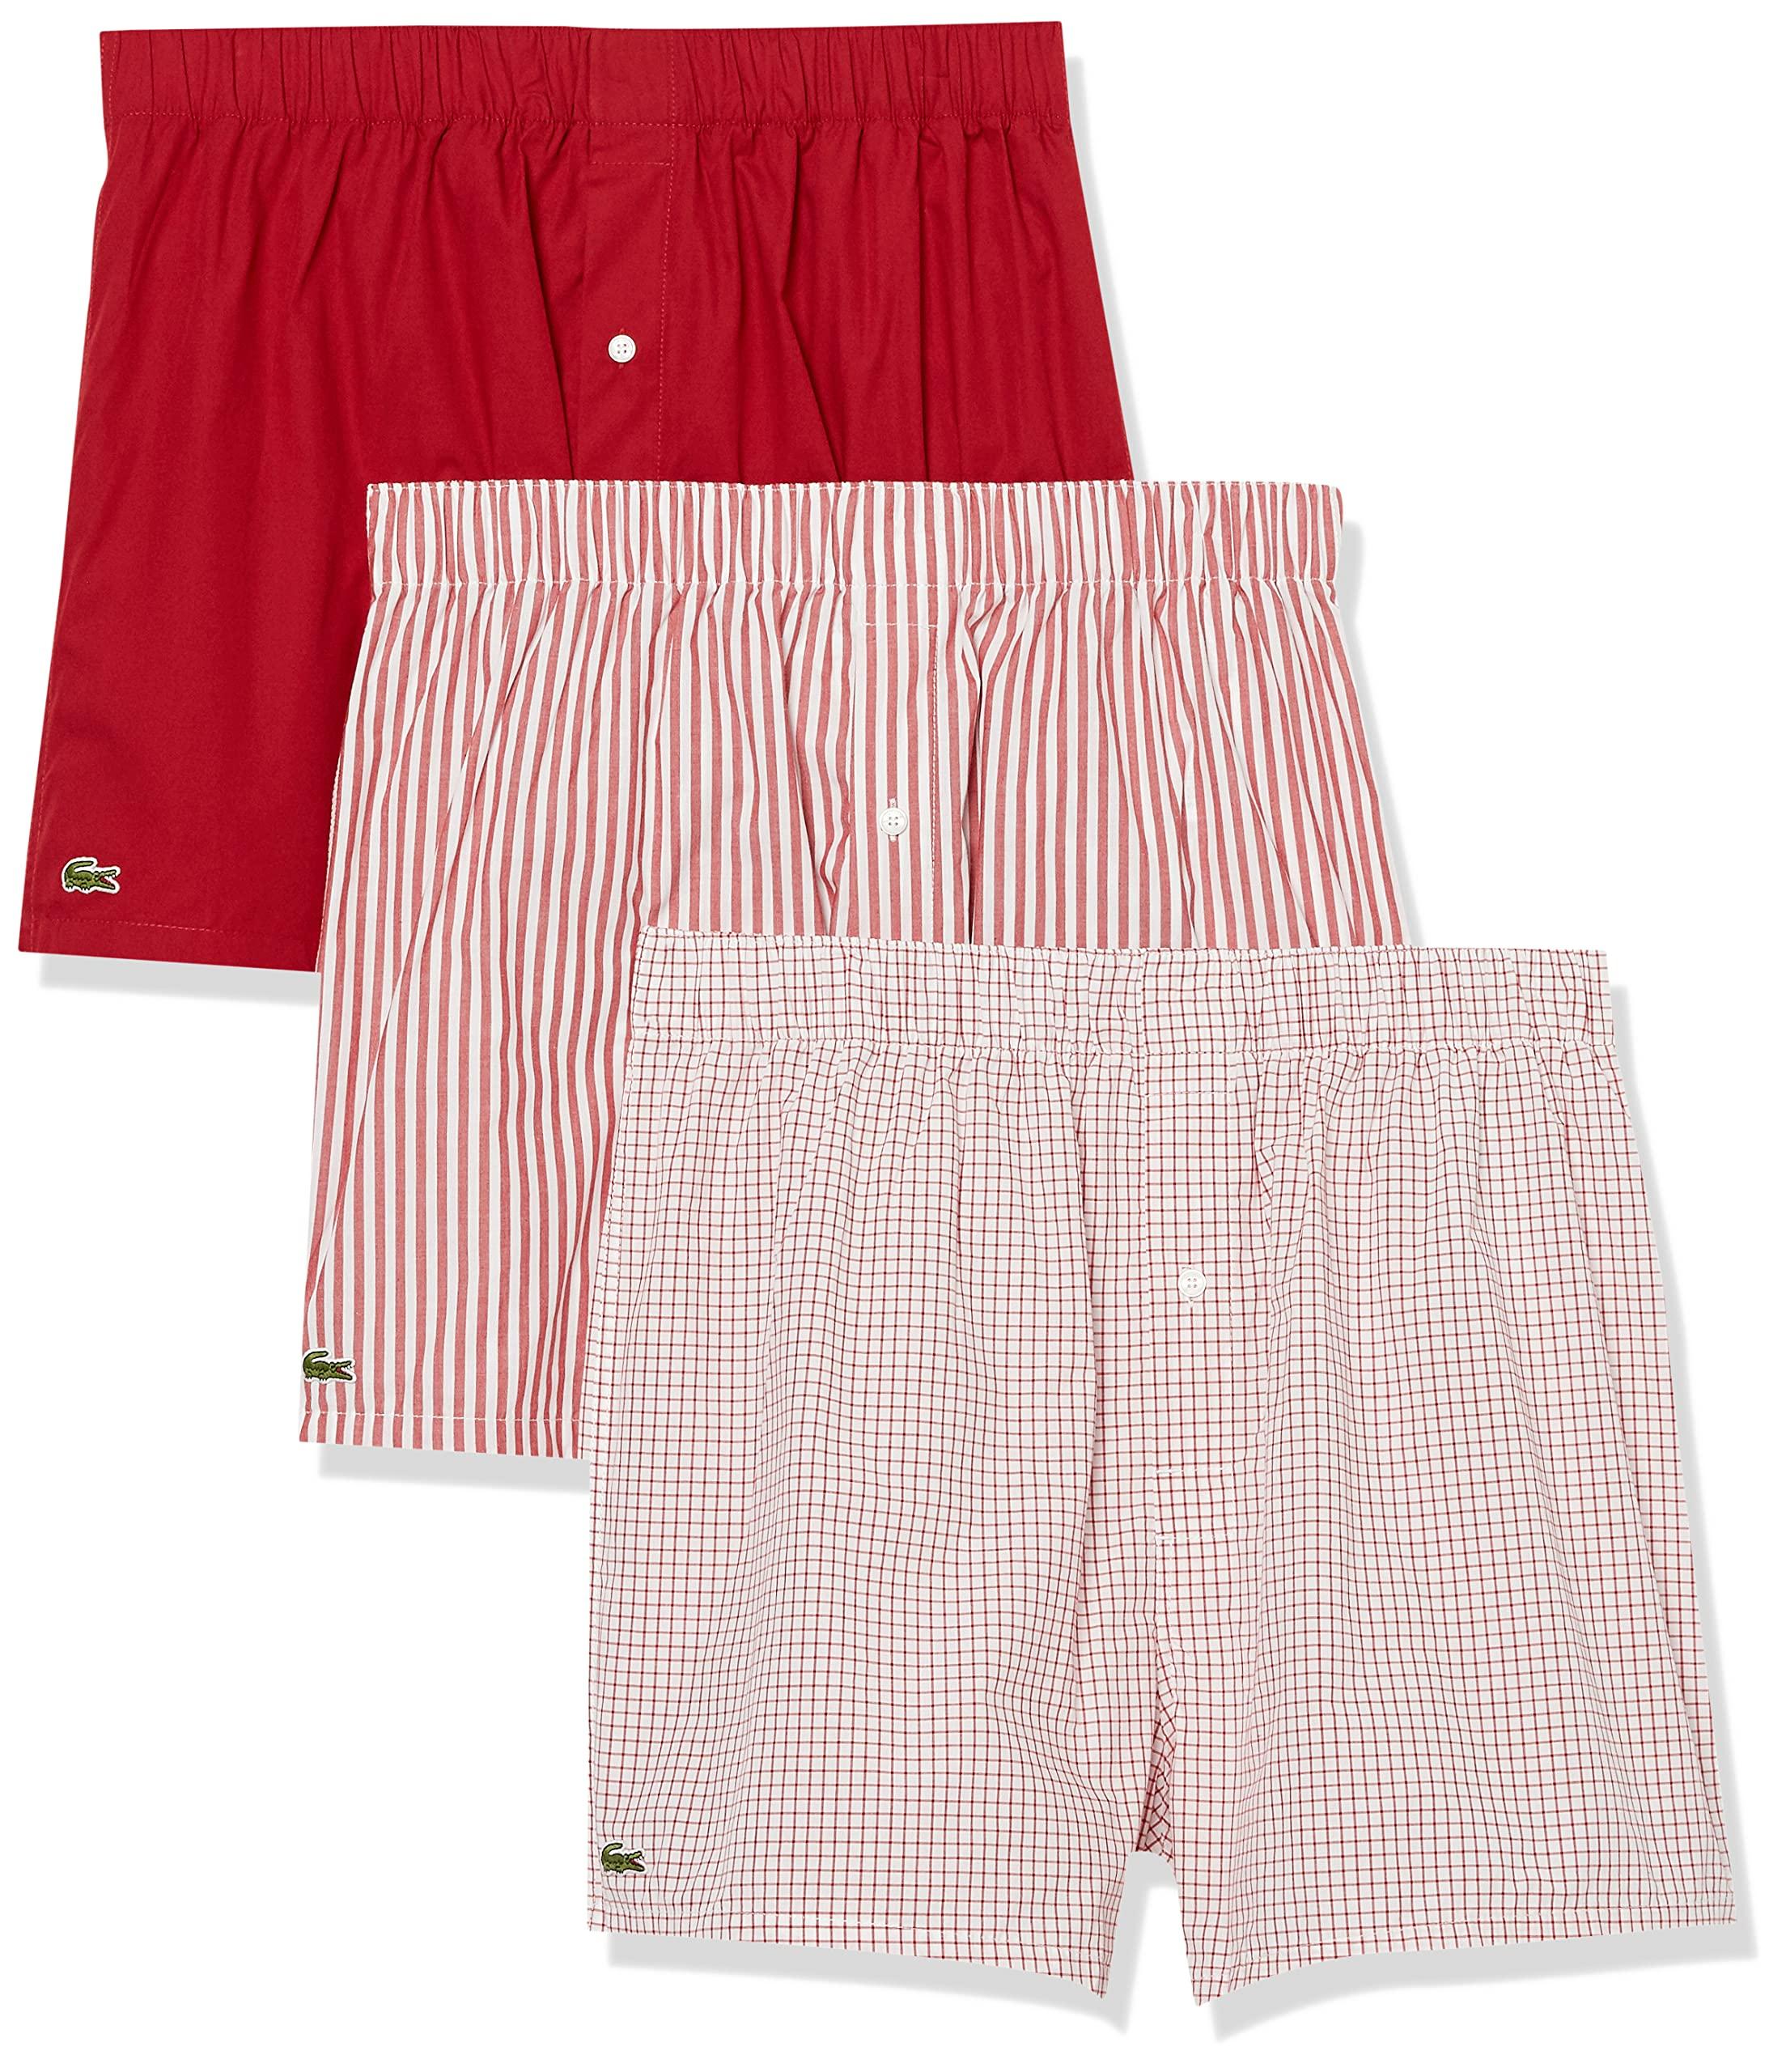 Lacoste Mens Striped 3 Pack Woven Boxer Shorts in Red | Lyst